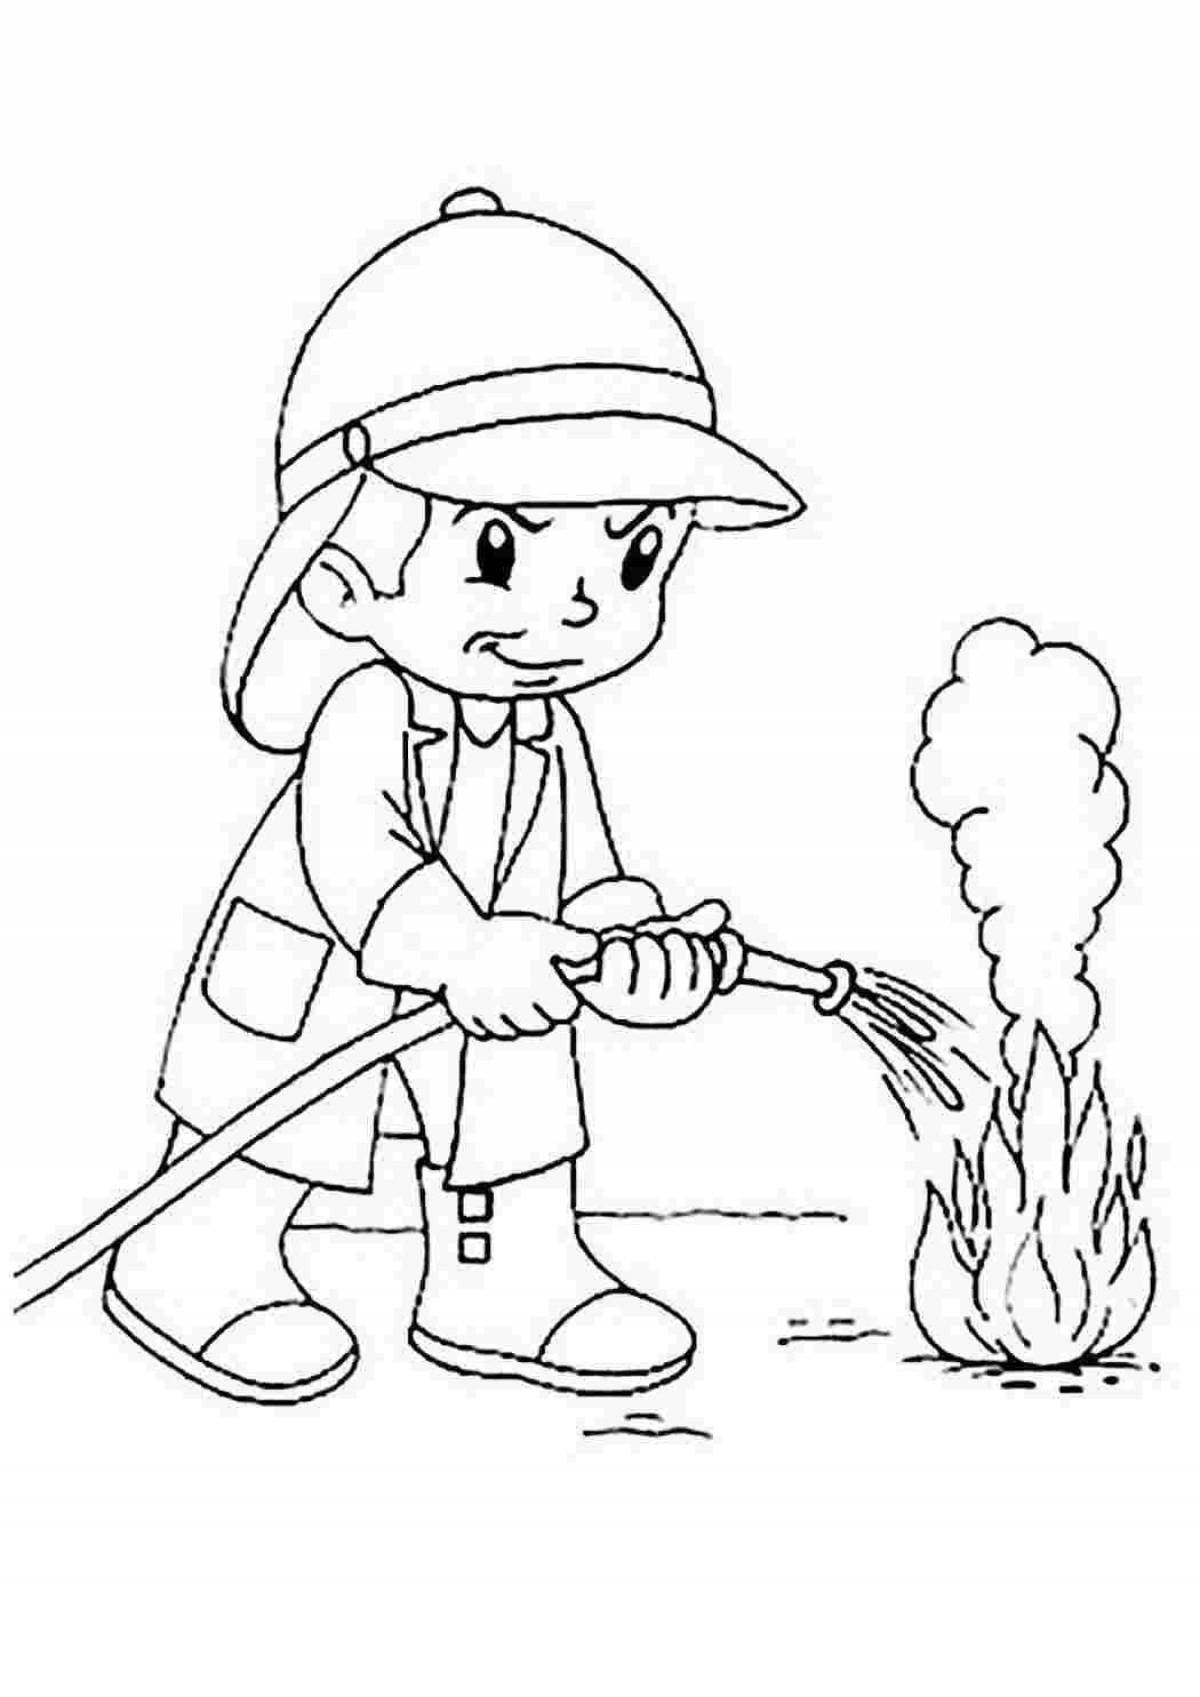 Kindergarten educational fire safety coloring book